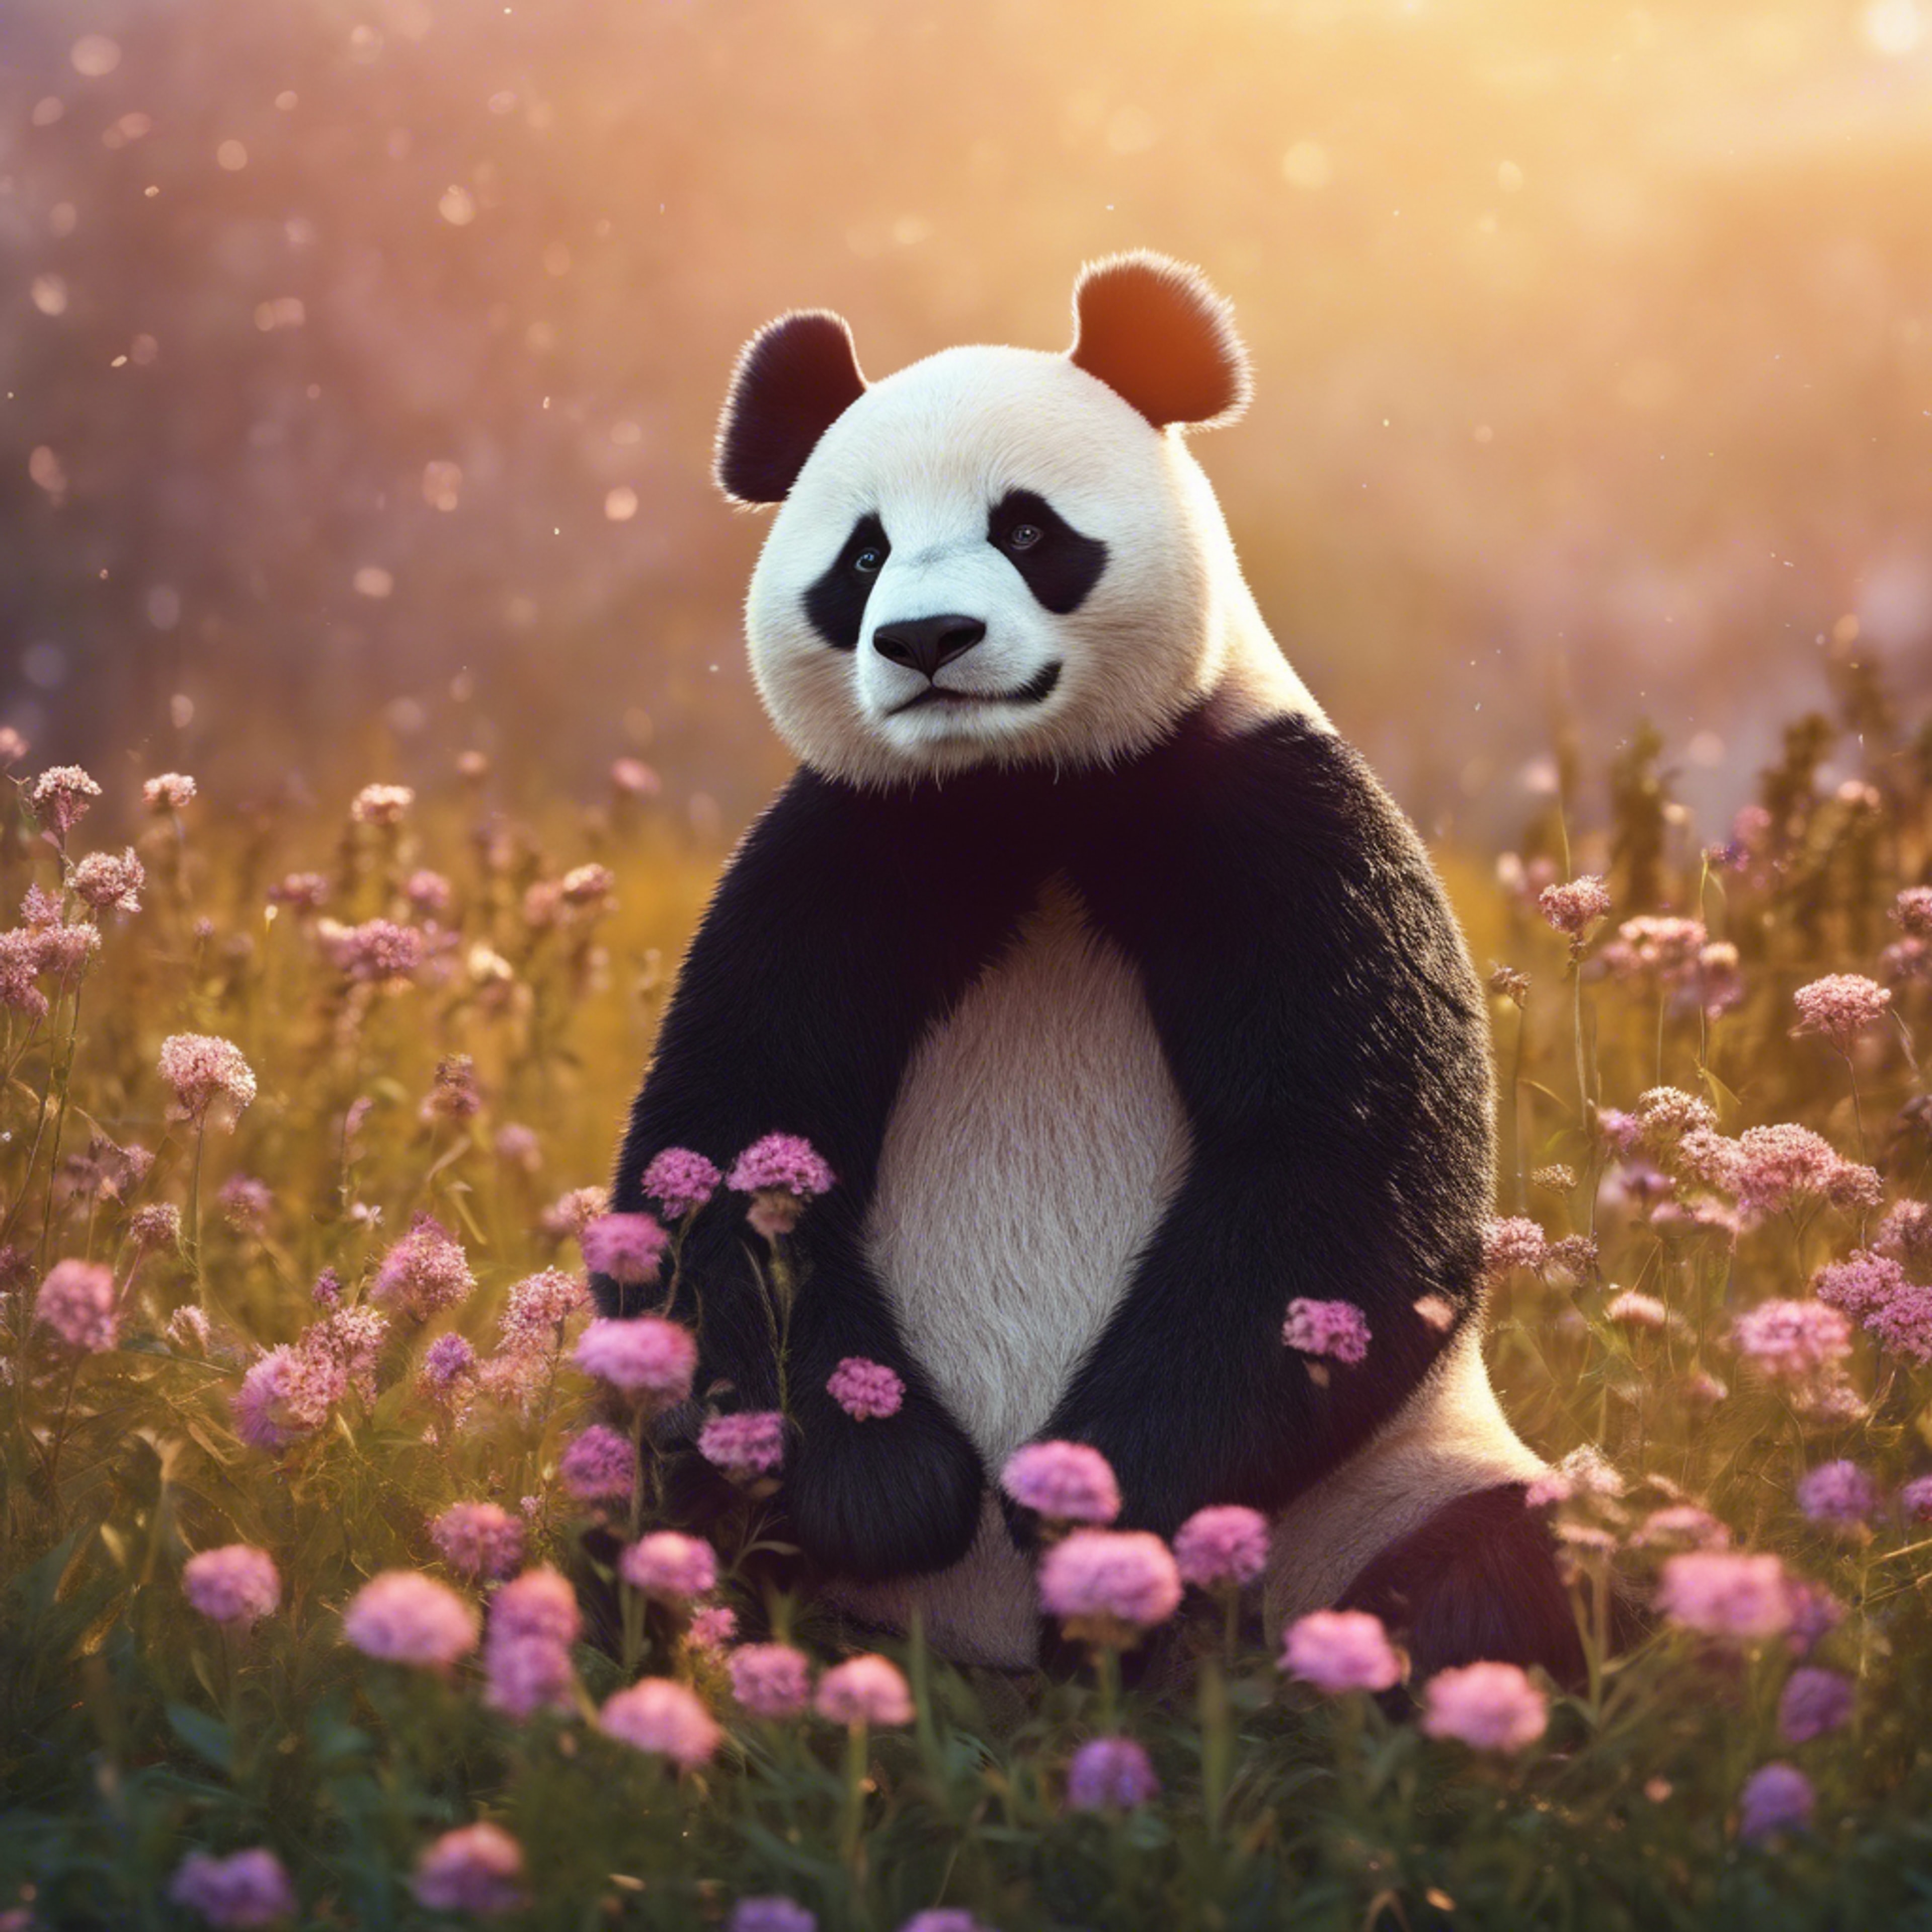 Beautiful illustration of a panda relaxing under the glow of the setting sun, surrounded by a field of wildflowers. Kertas dinding[4e88d1ee586942fa837d]